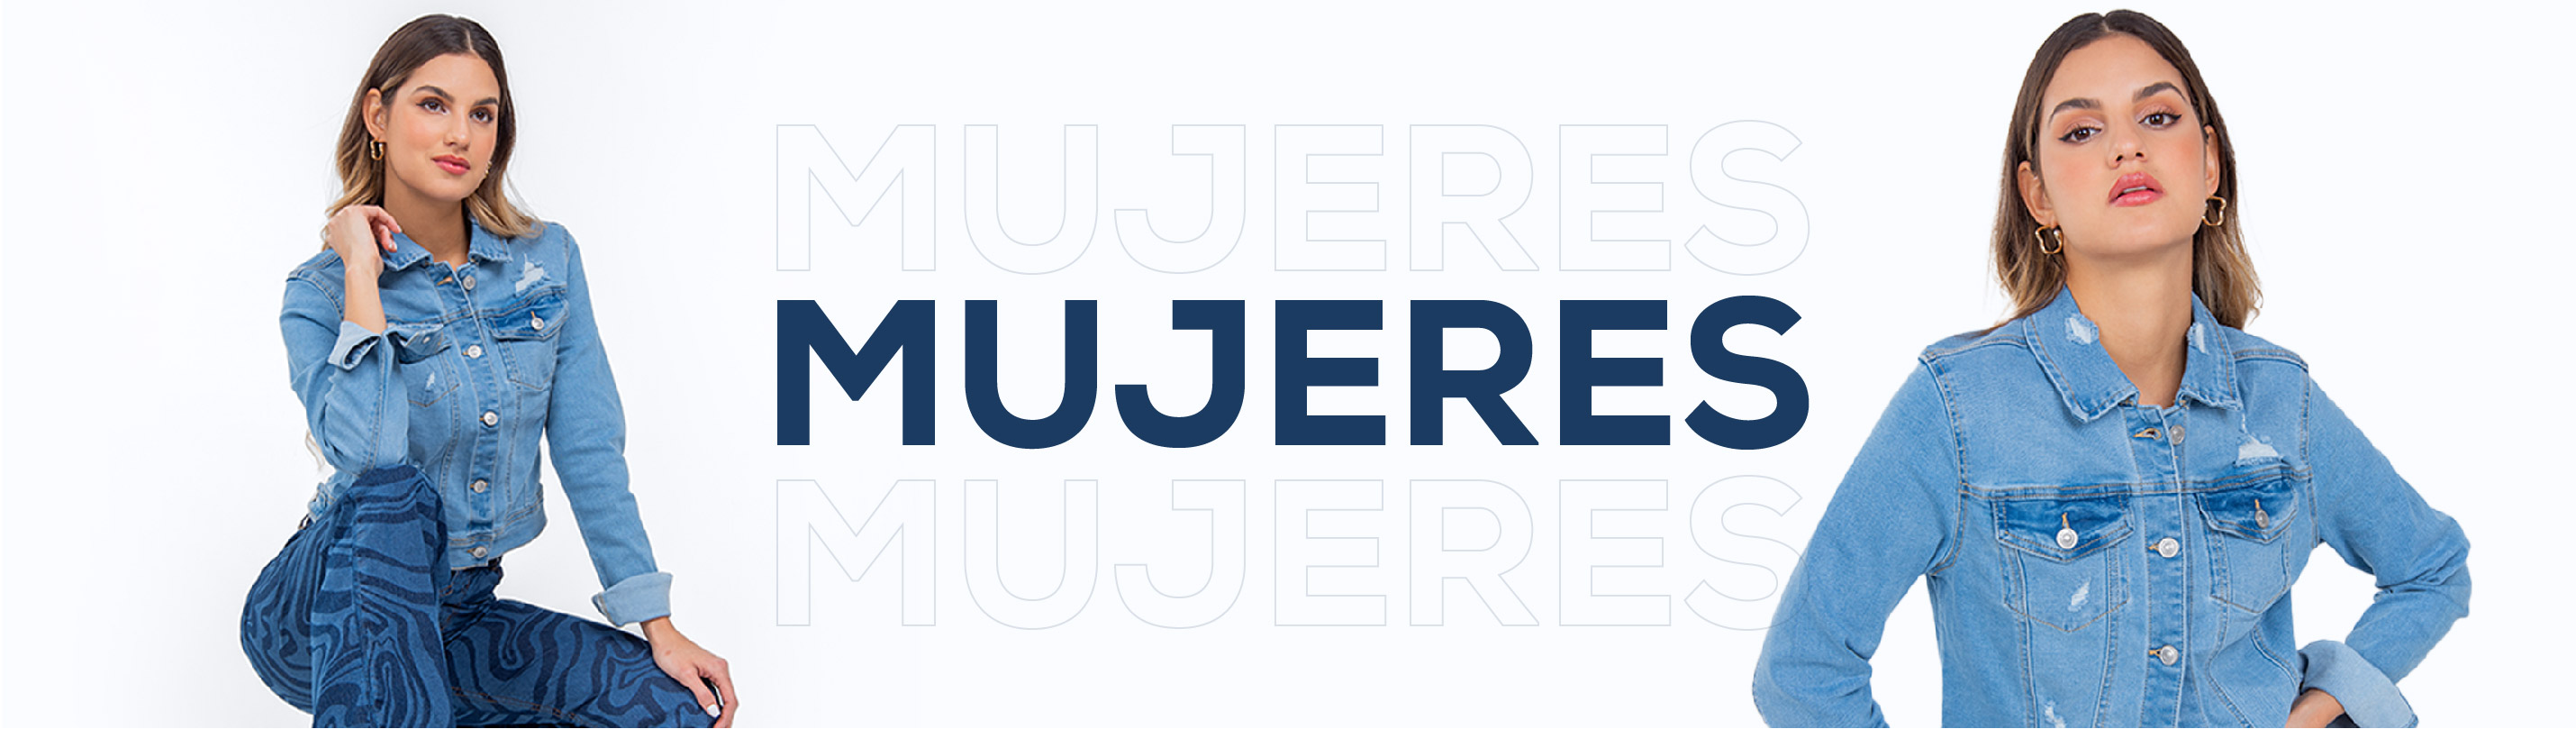 Banner mujeres